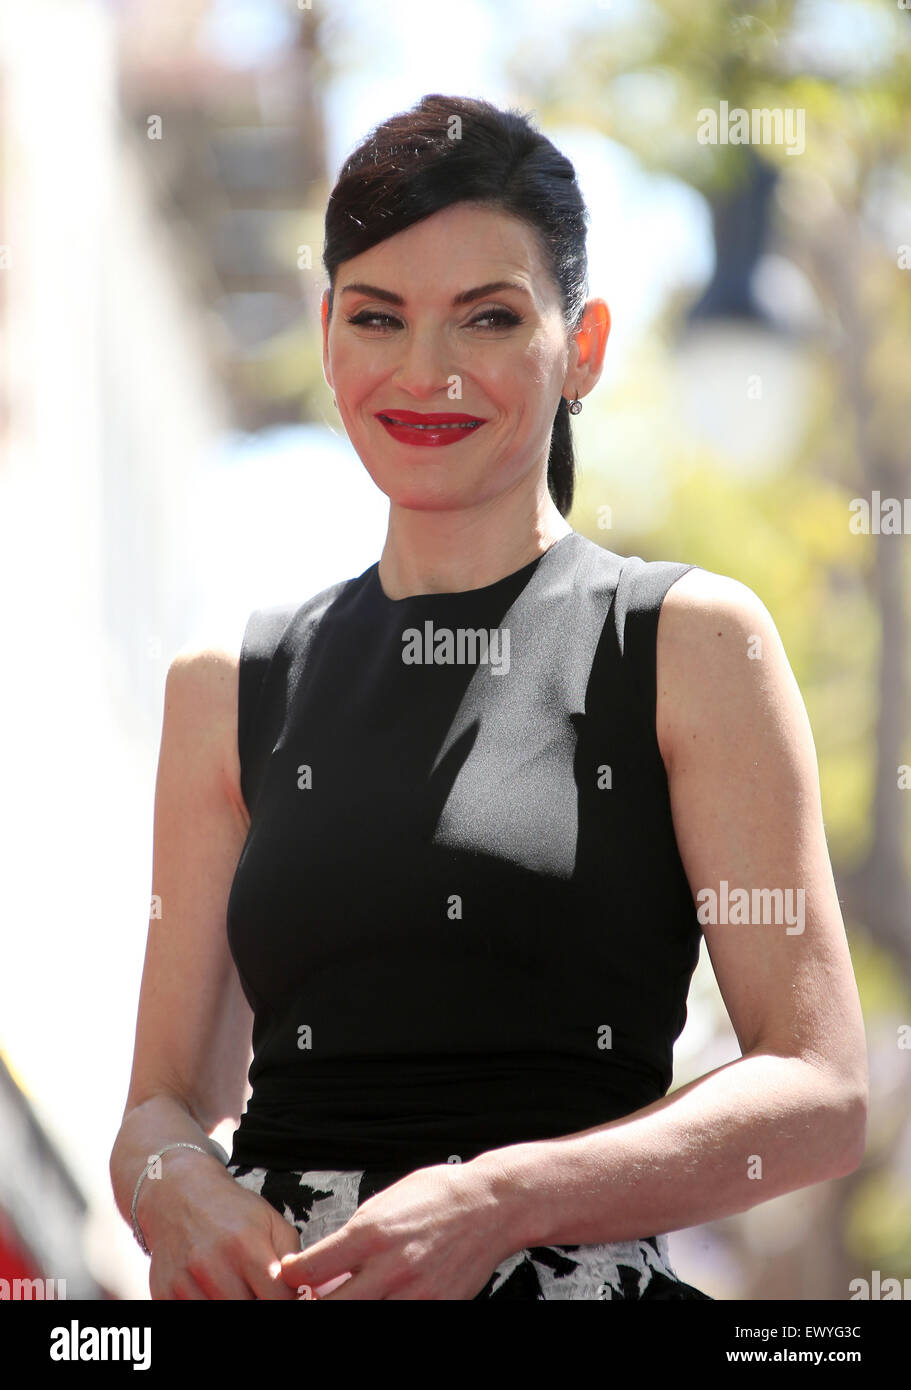 Julianna Margulies honored with a star on the Hollywood Walk of Fame  Featuring: Julianna Margulies Where: Hollywood, California, United States When: 01 May 2015 C Stock Photo